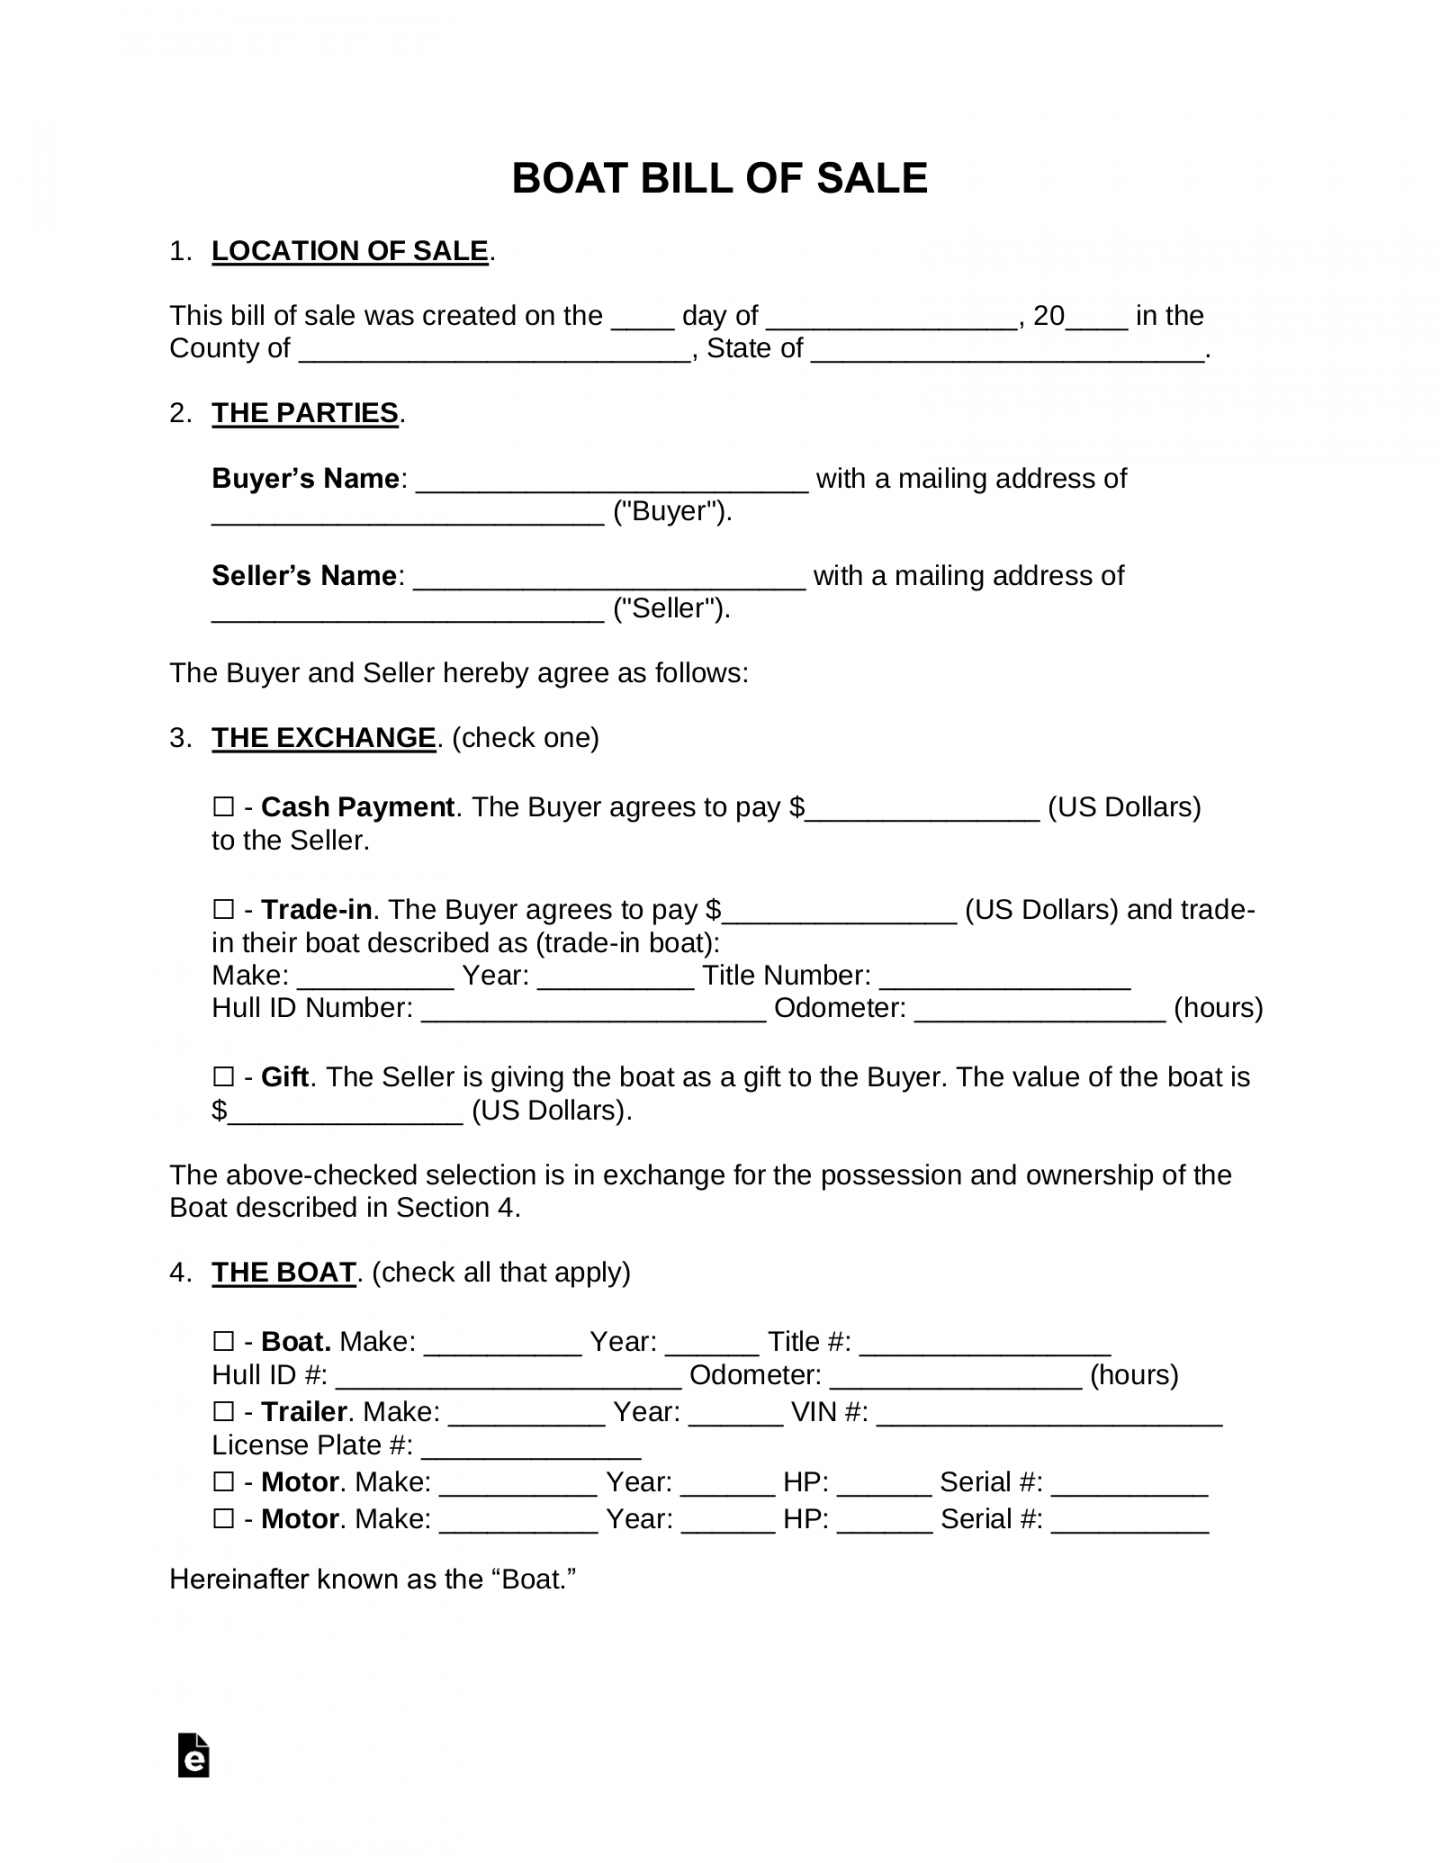 Free Boat Bill of Sale Form - PDF  Word – eForms - FREE Printables - Free Printable Bill Of Sale For Boat And Trailer